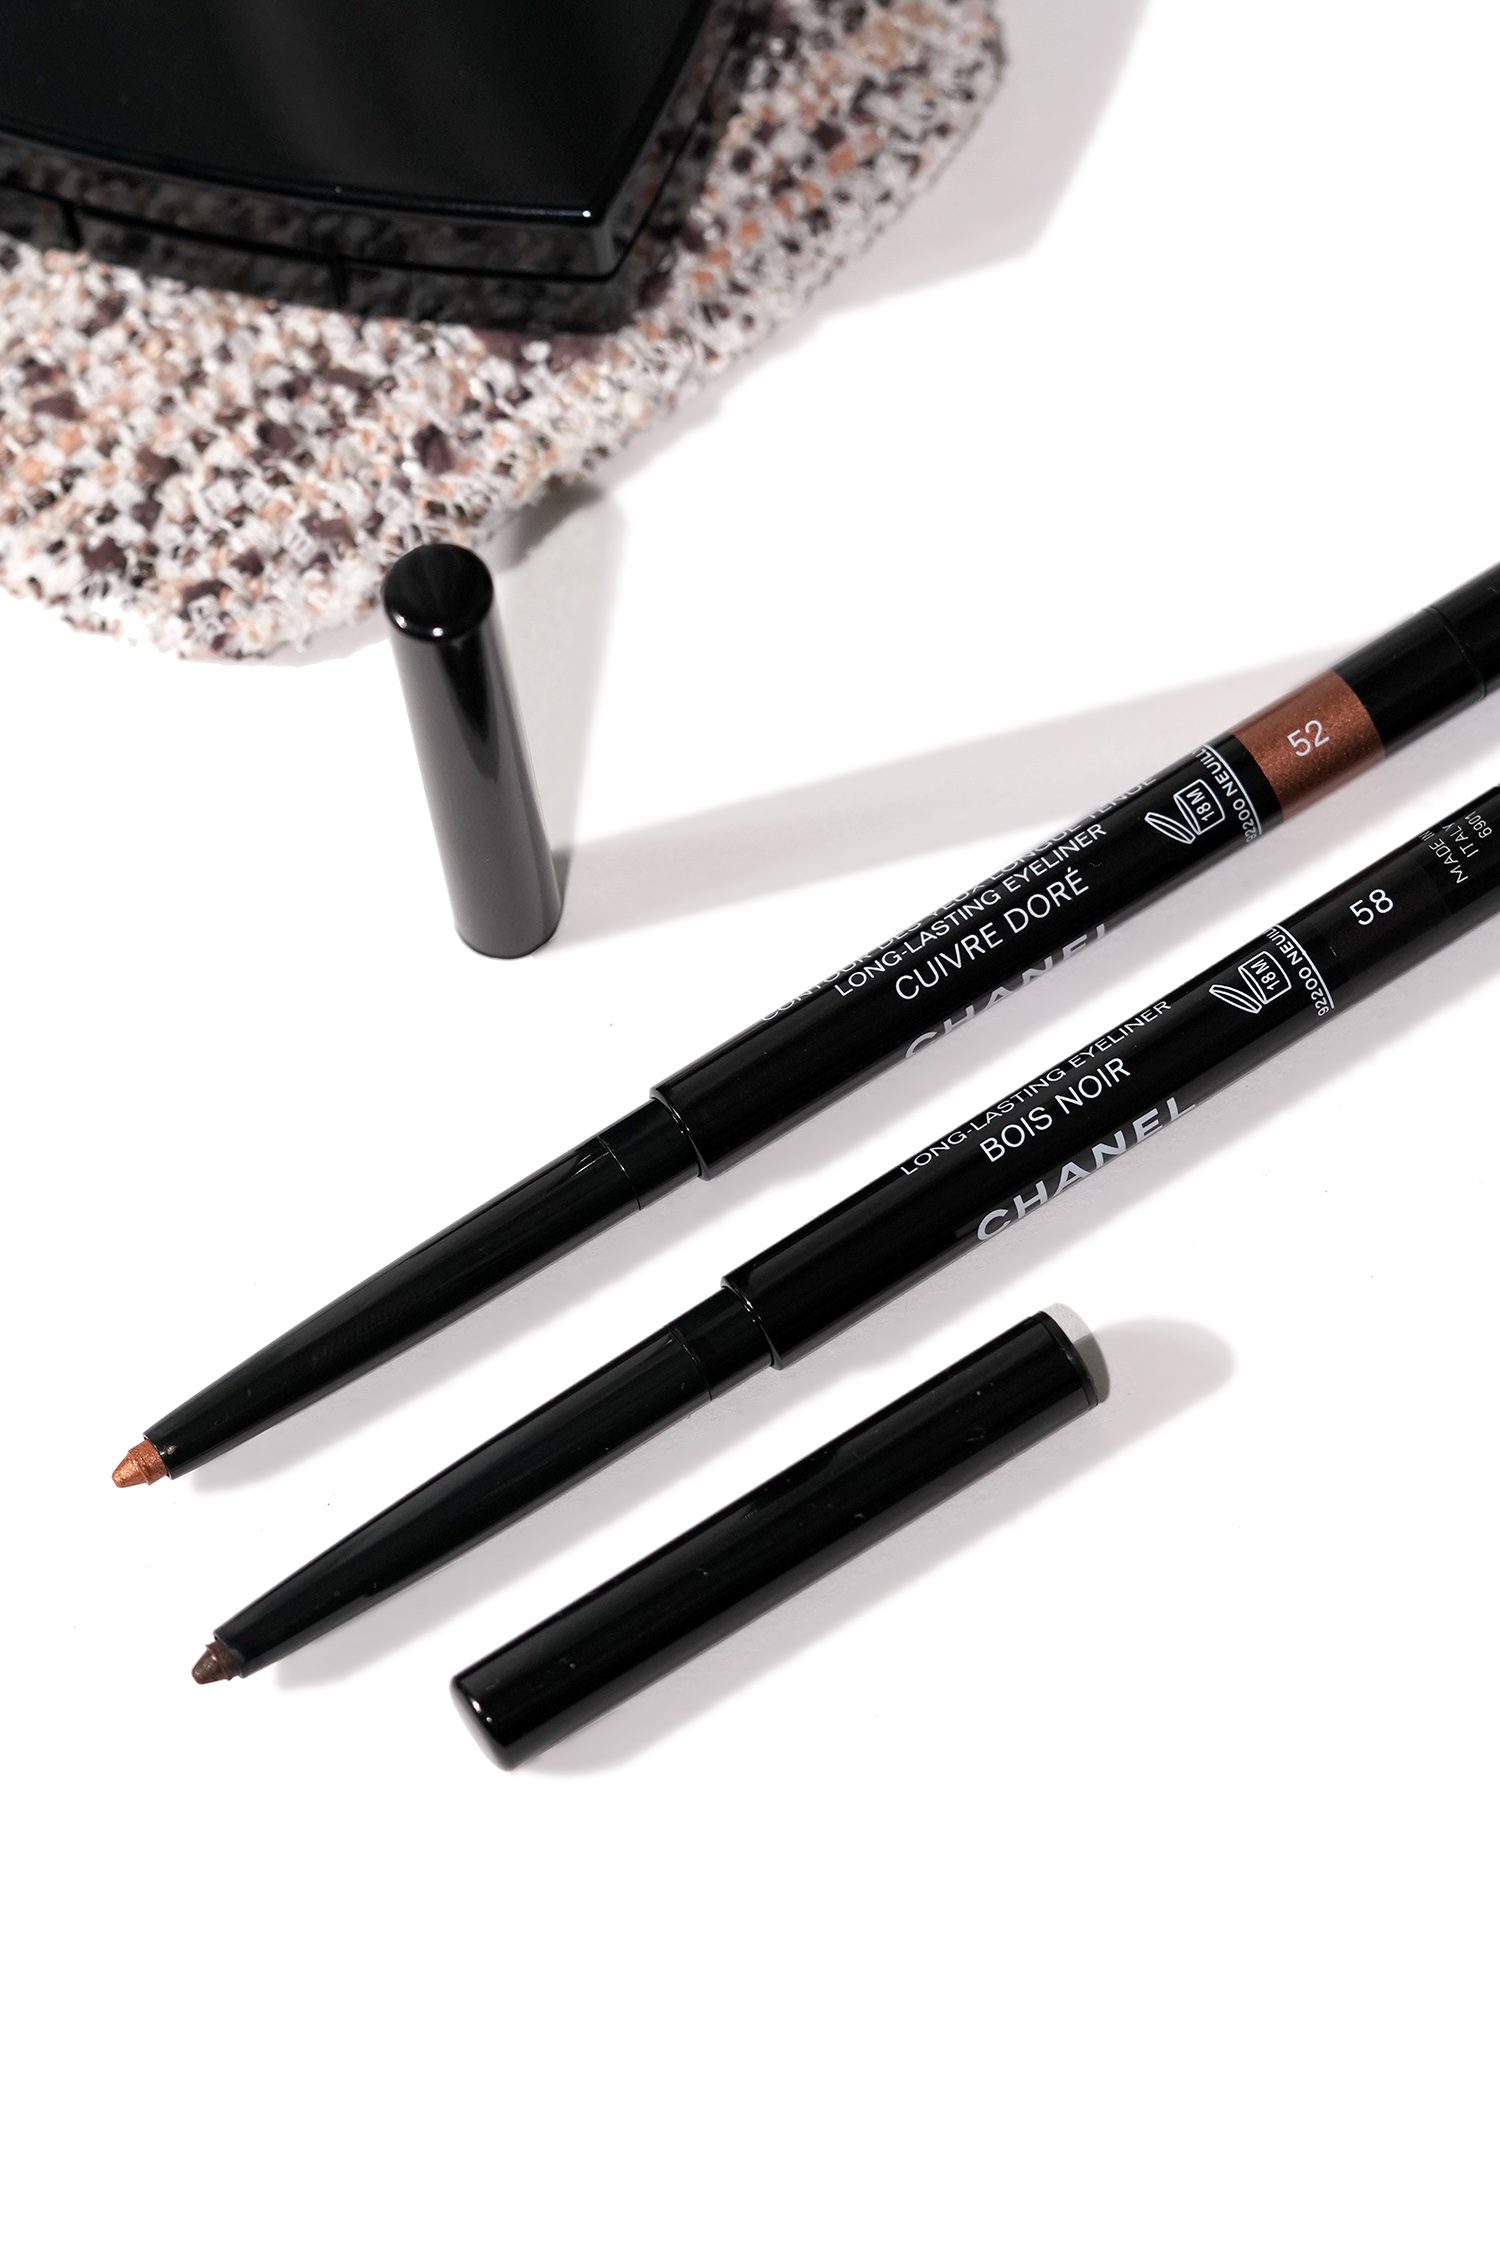 Chanel Smoky Grey 905 and Marron Glacé 906 Stylo Yeux Waterproof Eyeliners